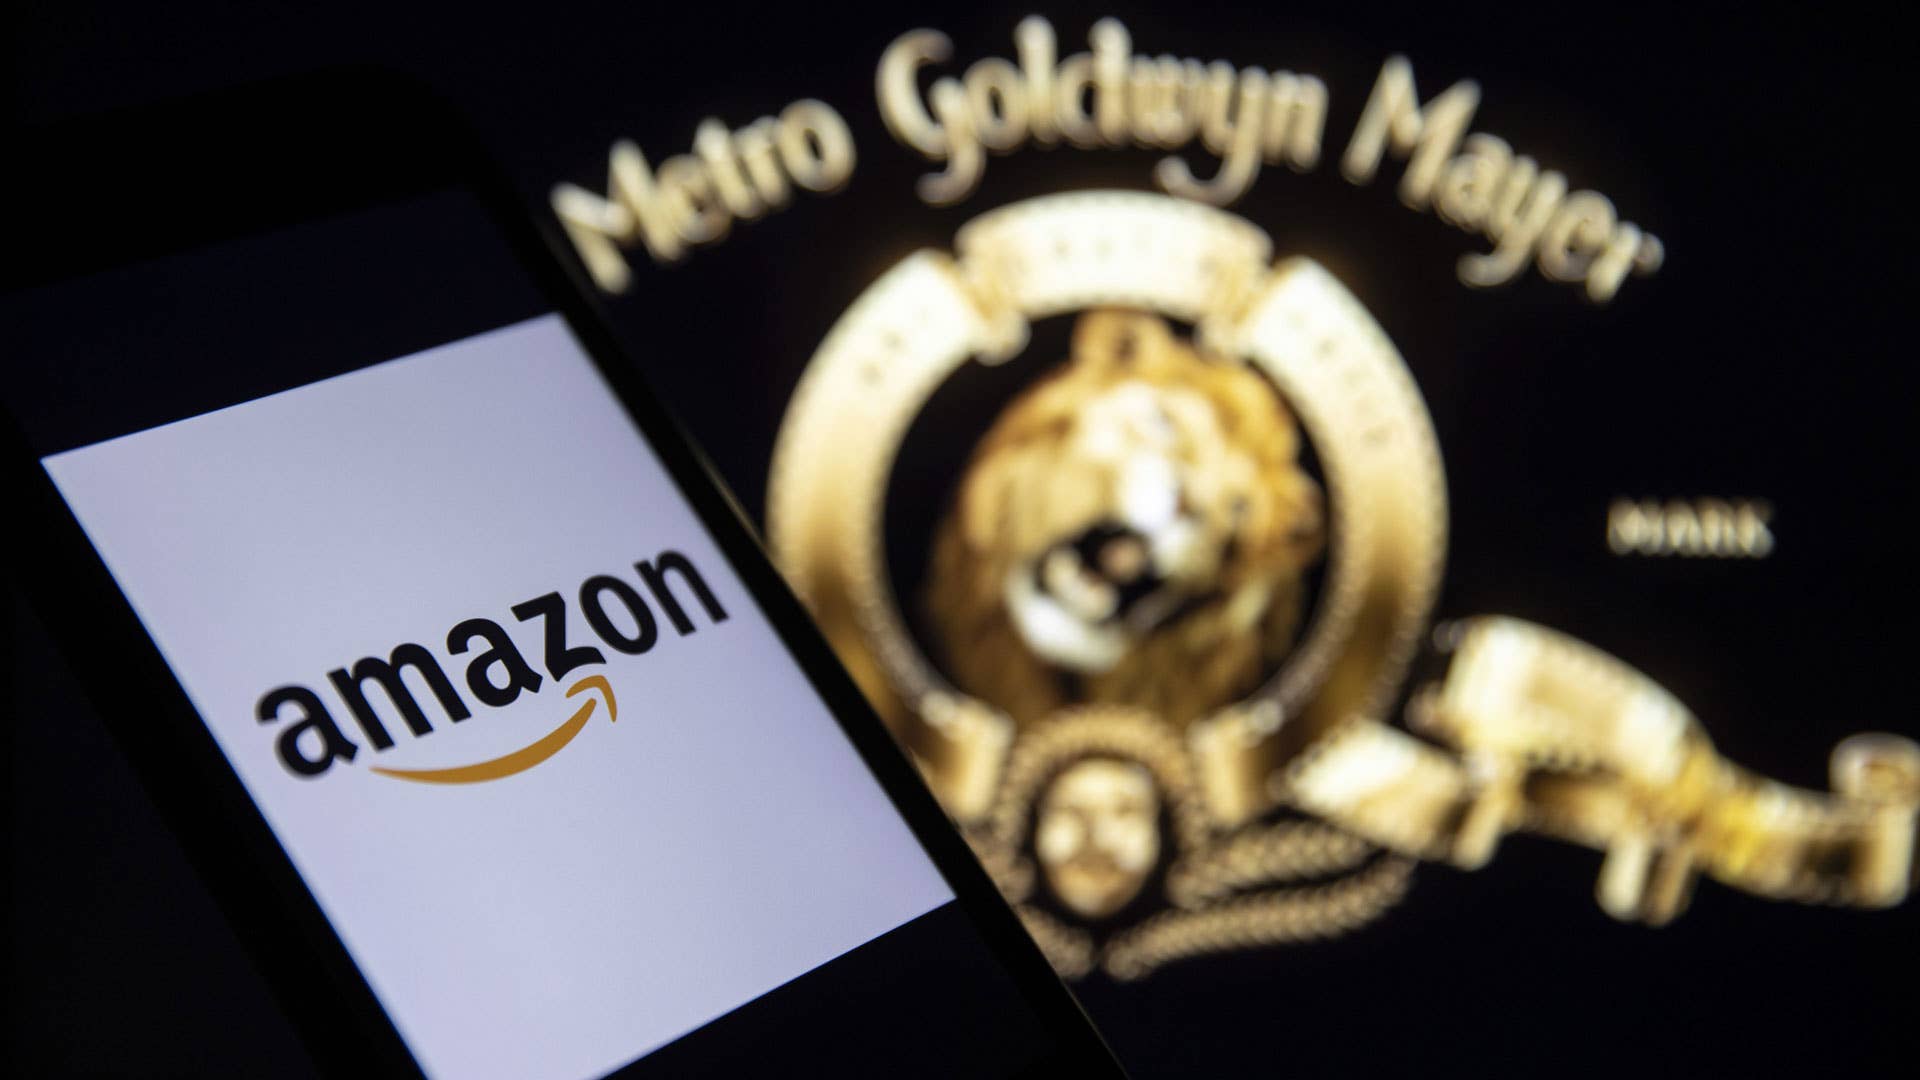 The Amazon and MGM logos